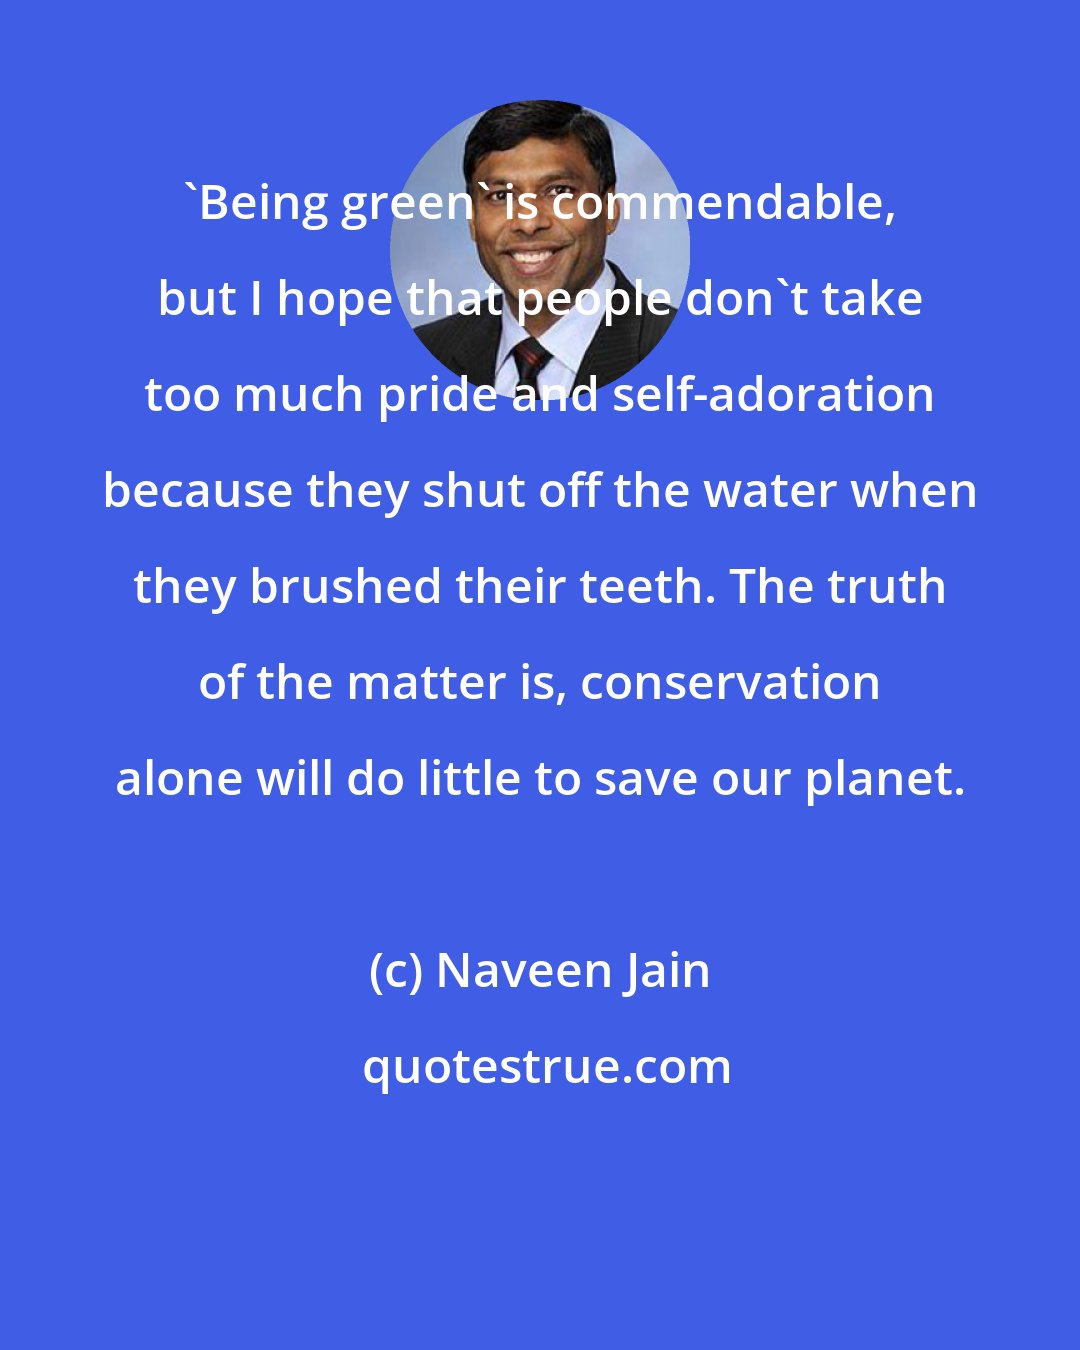 Naveen Jain: 'Being green' is commendable, but I hope that people don't take too much pride and self-adoration because they shut off the water when they brushed their teeth. The truth of the matter is, conservation alone will do little to save our planet.